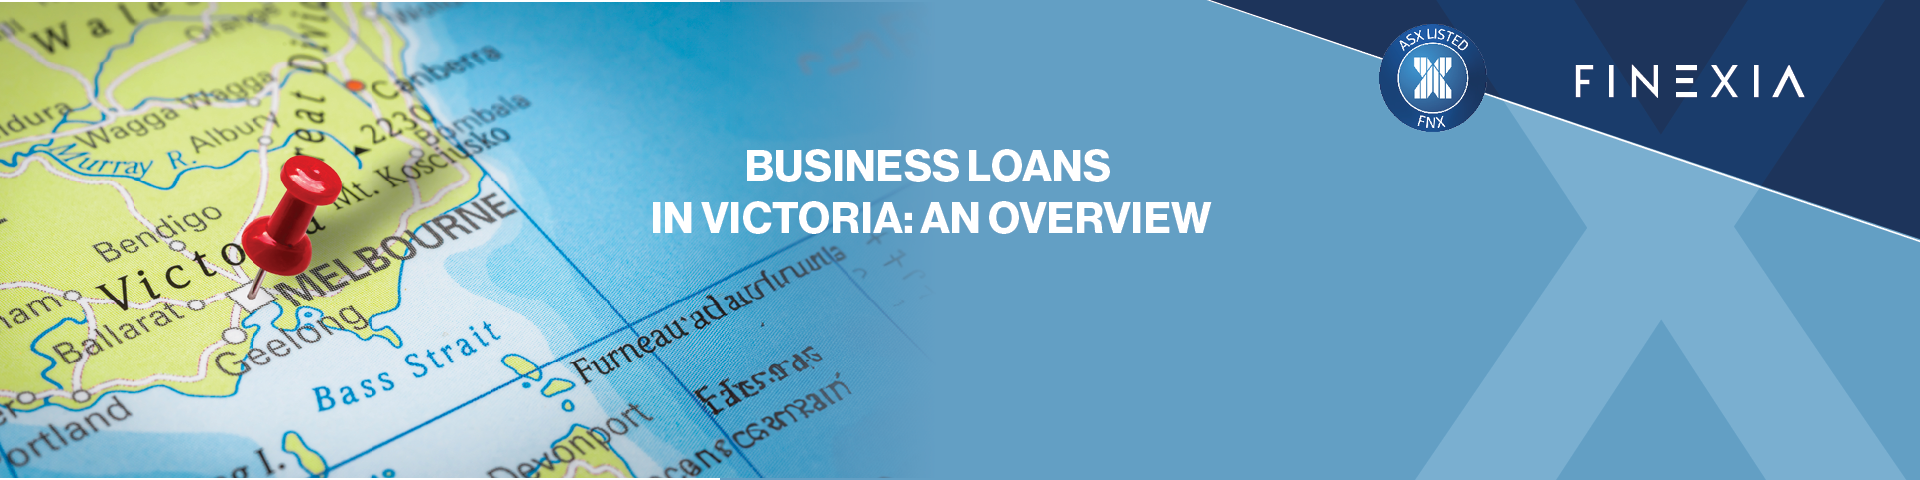 Business Loans in Victoria: An Overview